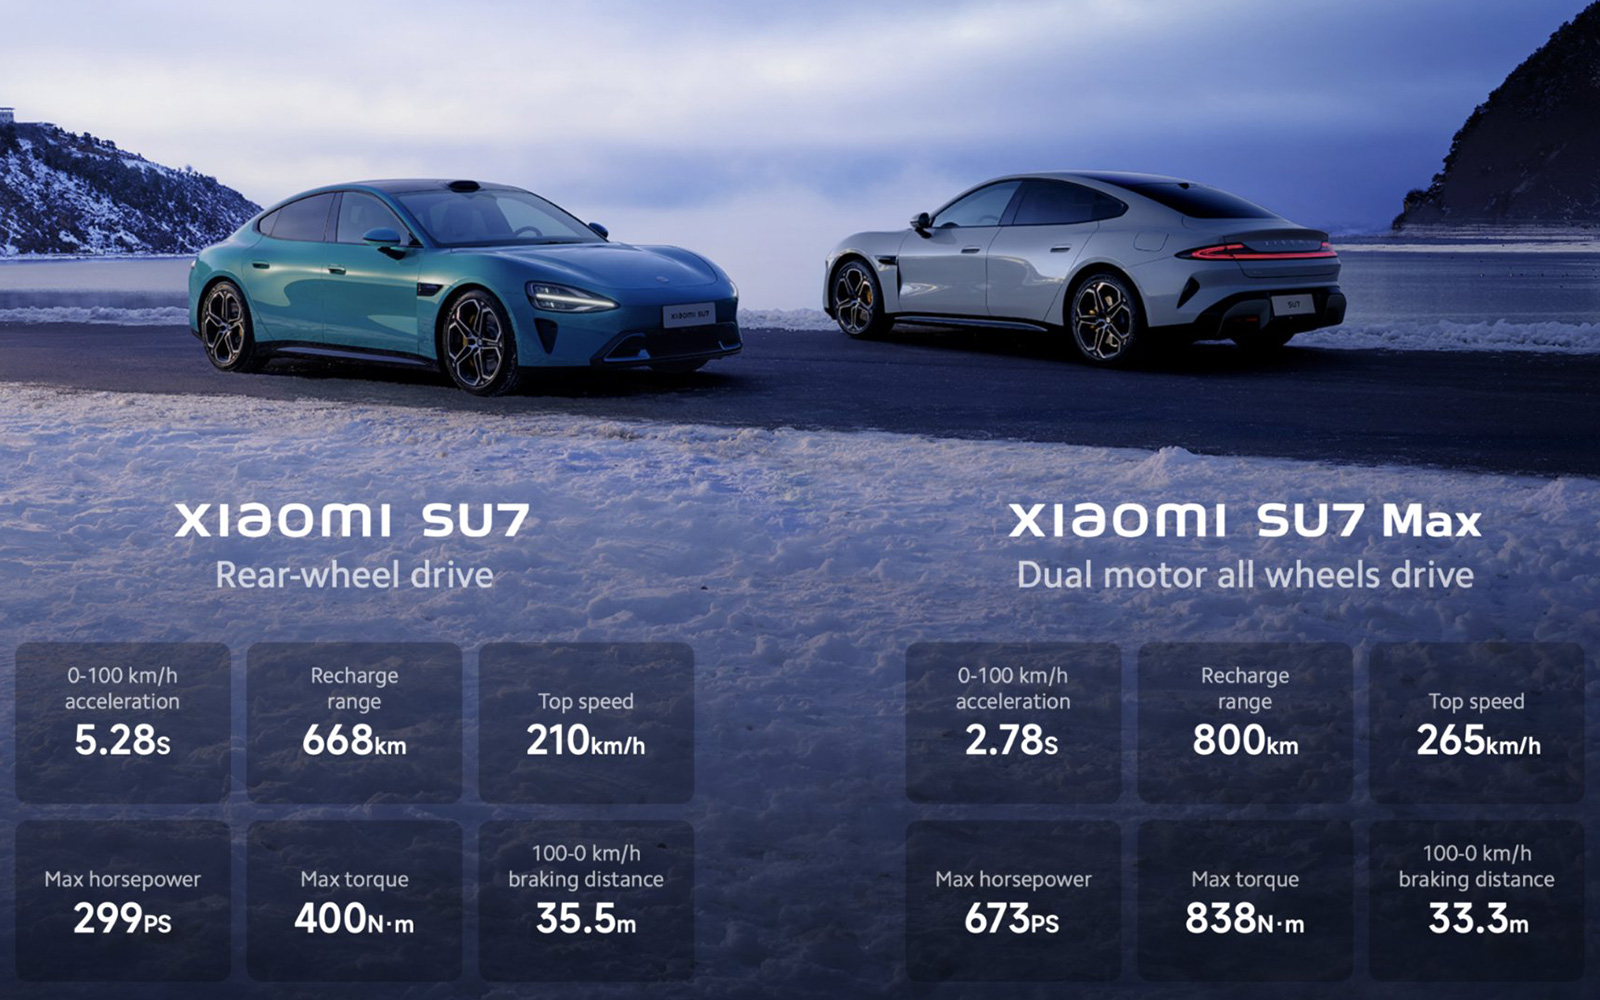 Xiaomi said its SU7 EV is more technologically advanced than Tesla and better than Porsche